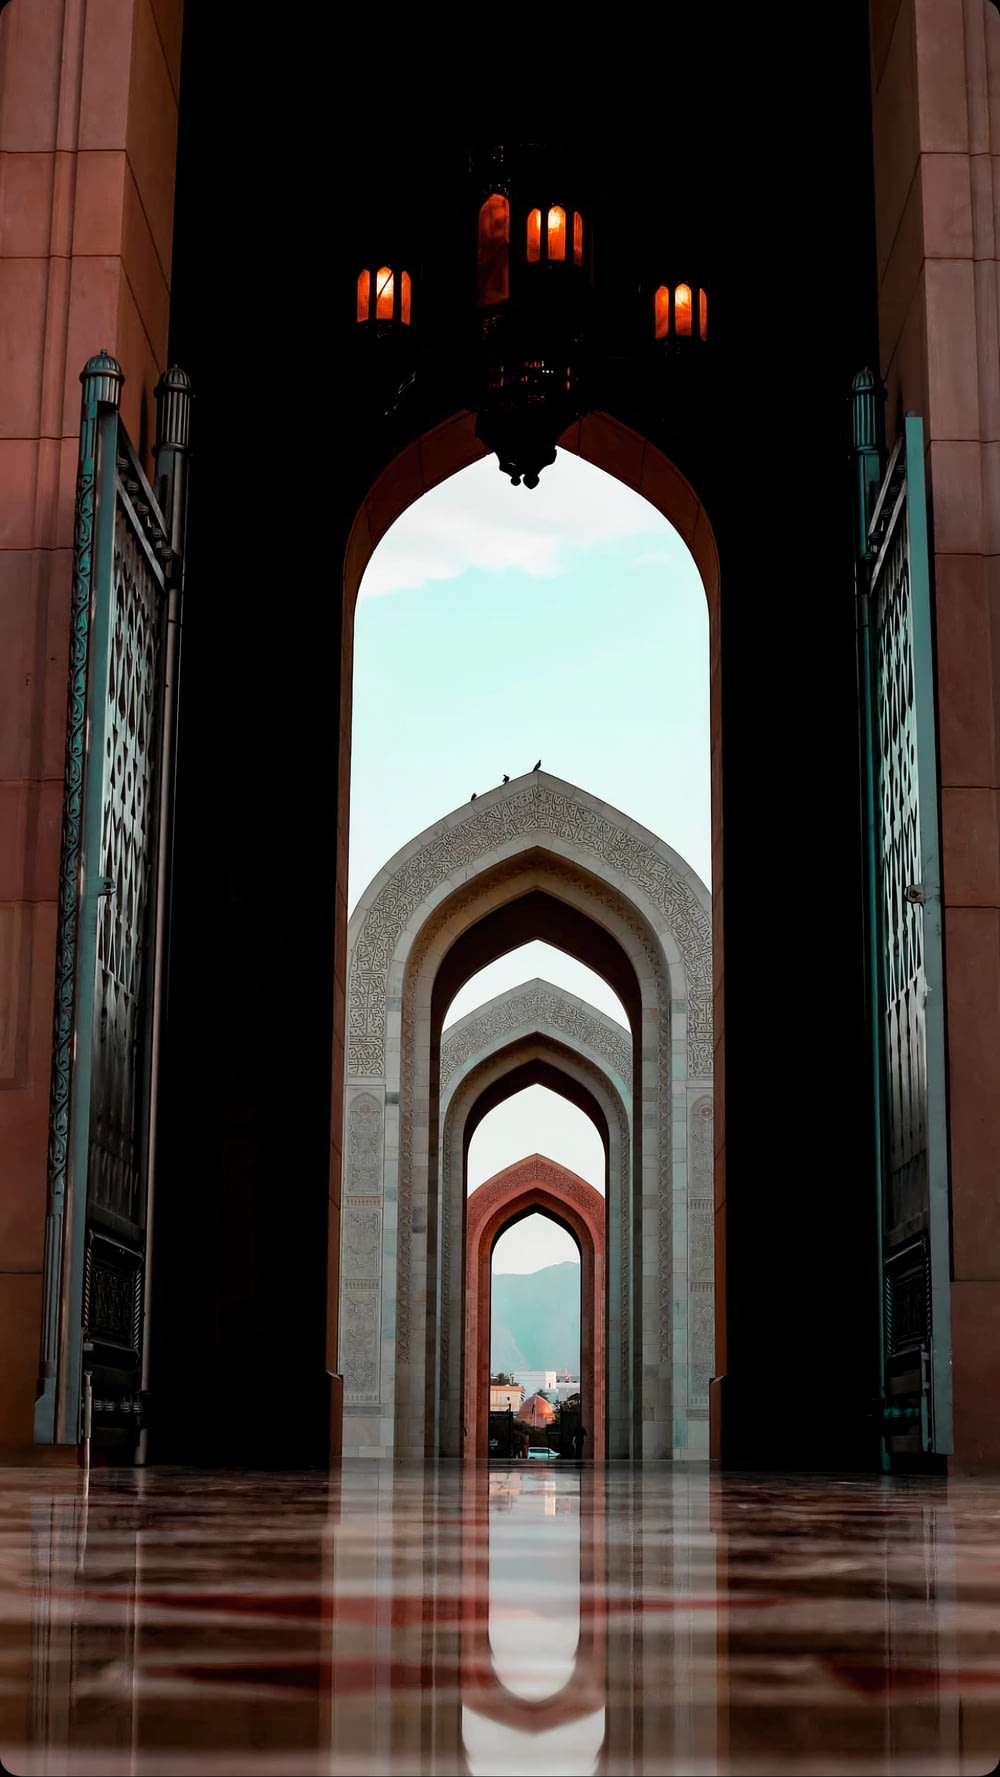 a large archway with a clock on top of it